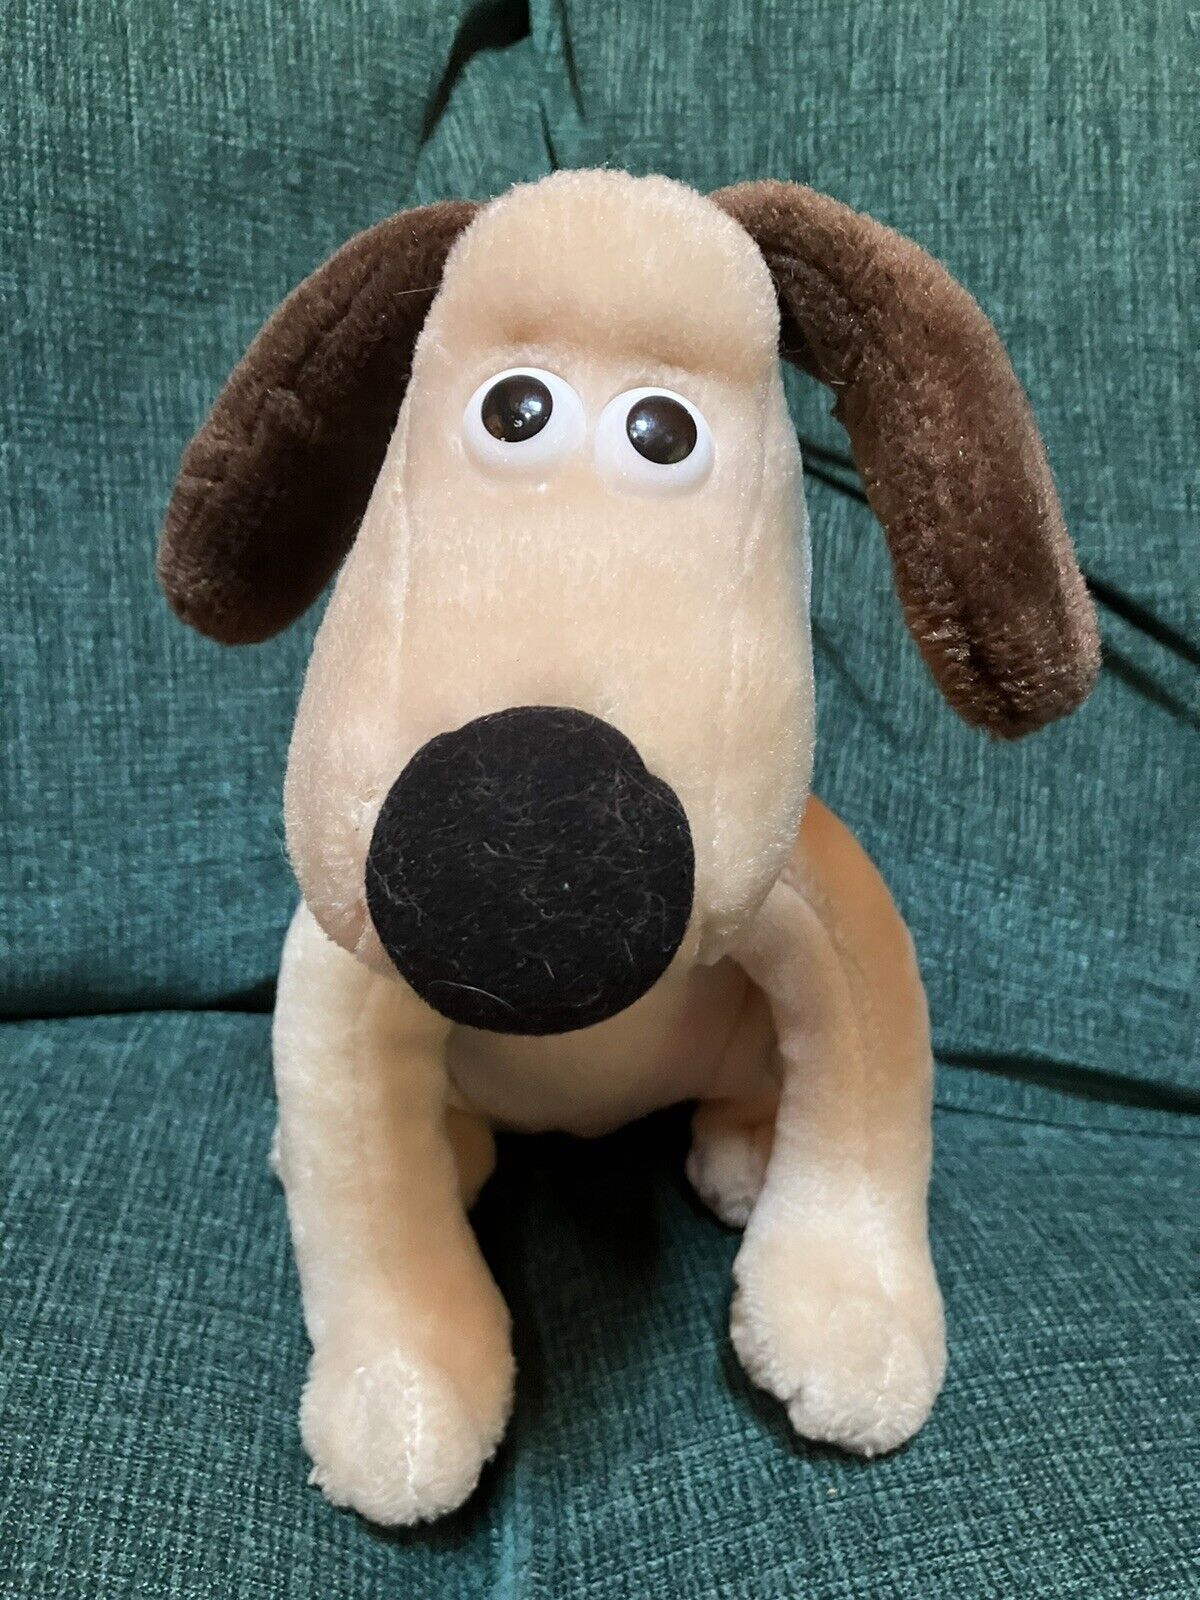 Rare Vintage Wallace And Gromit Plush Dog Seated Aardman Animation 